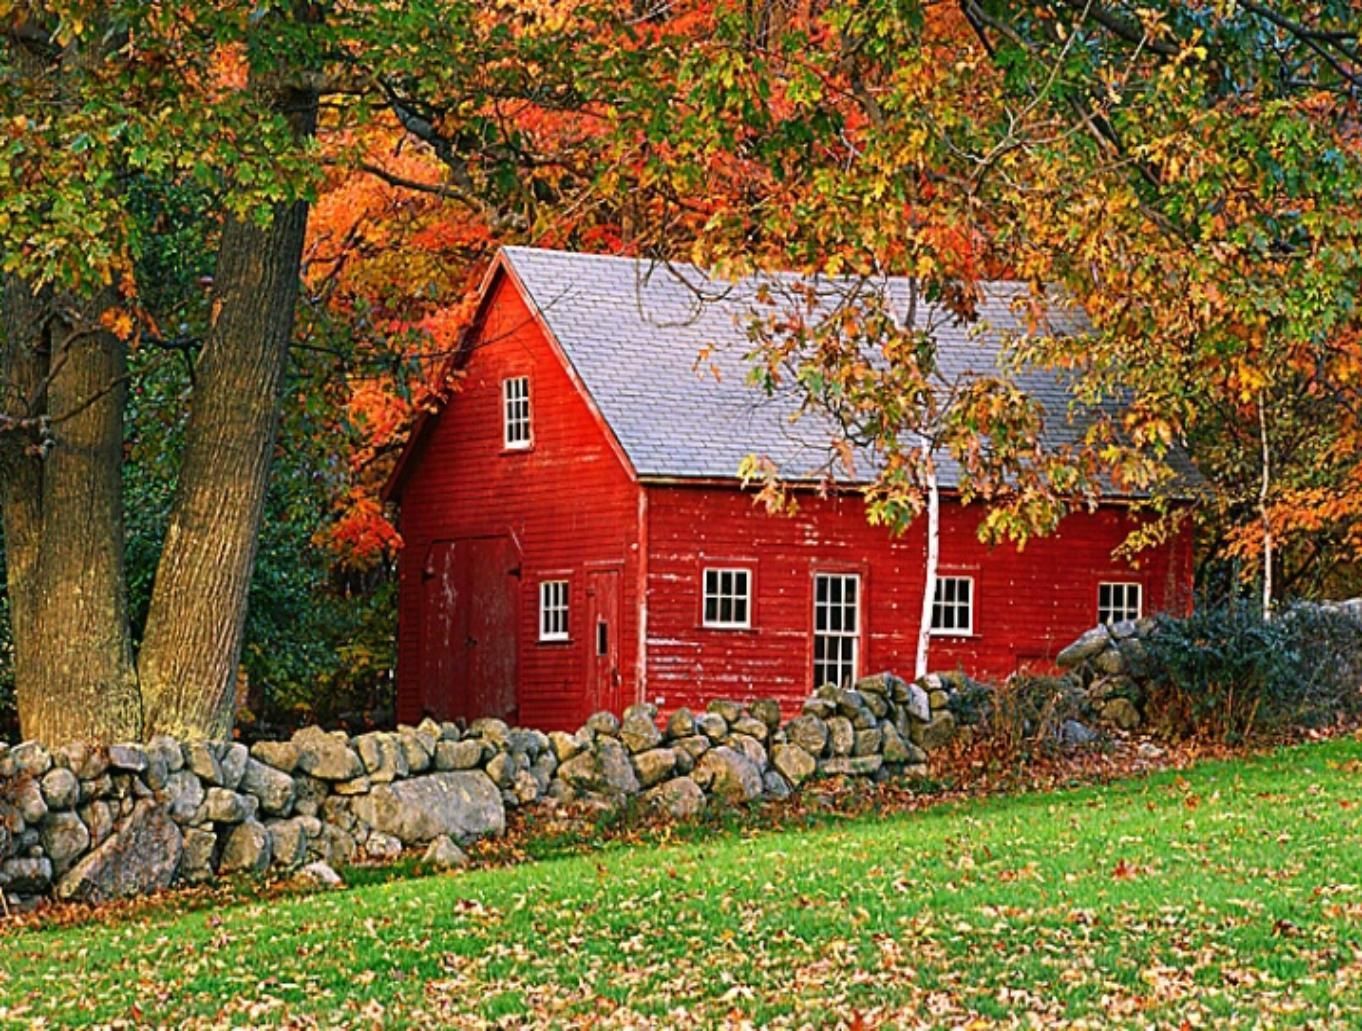 picture of barns in the fall Image. Barn picture, Red barns, Old barns